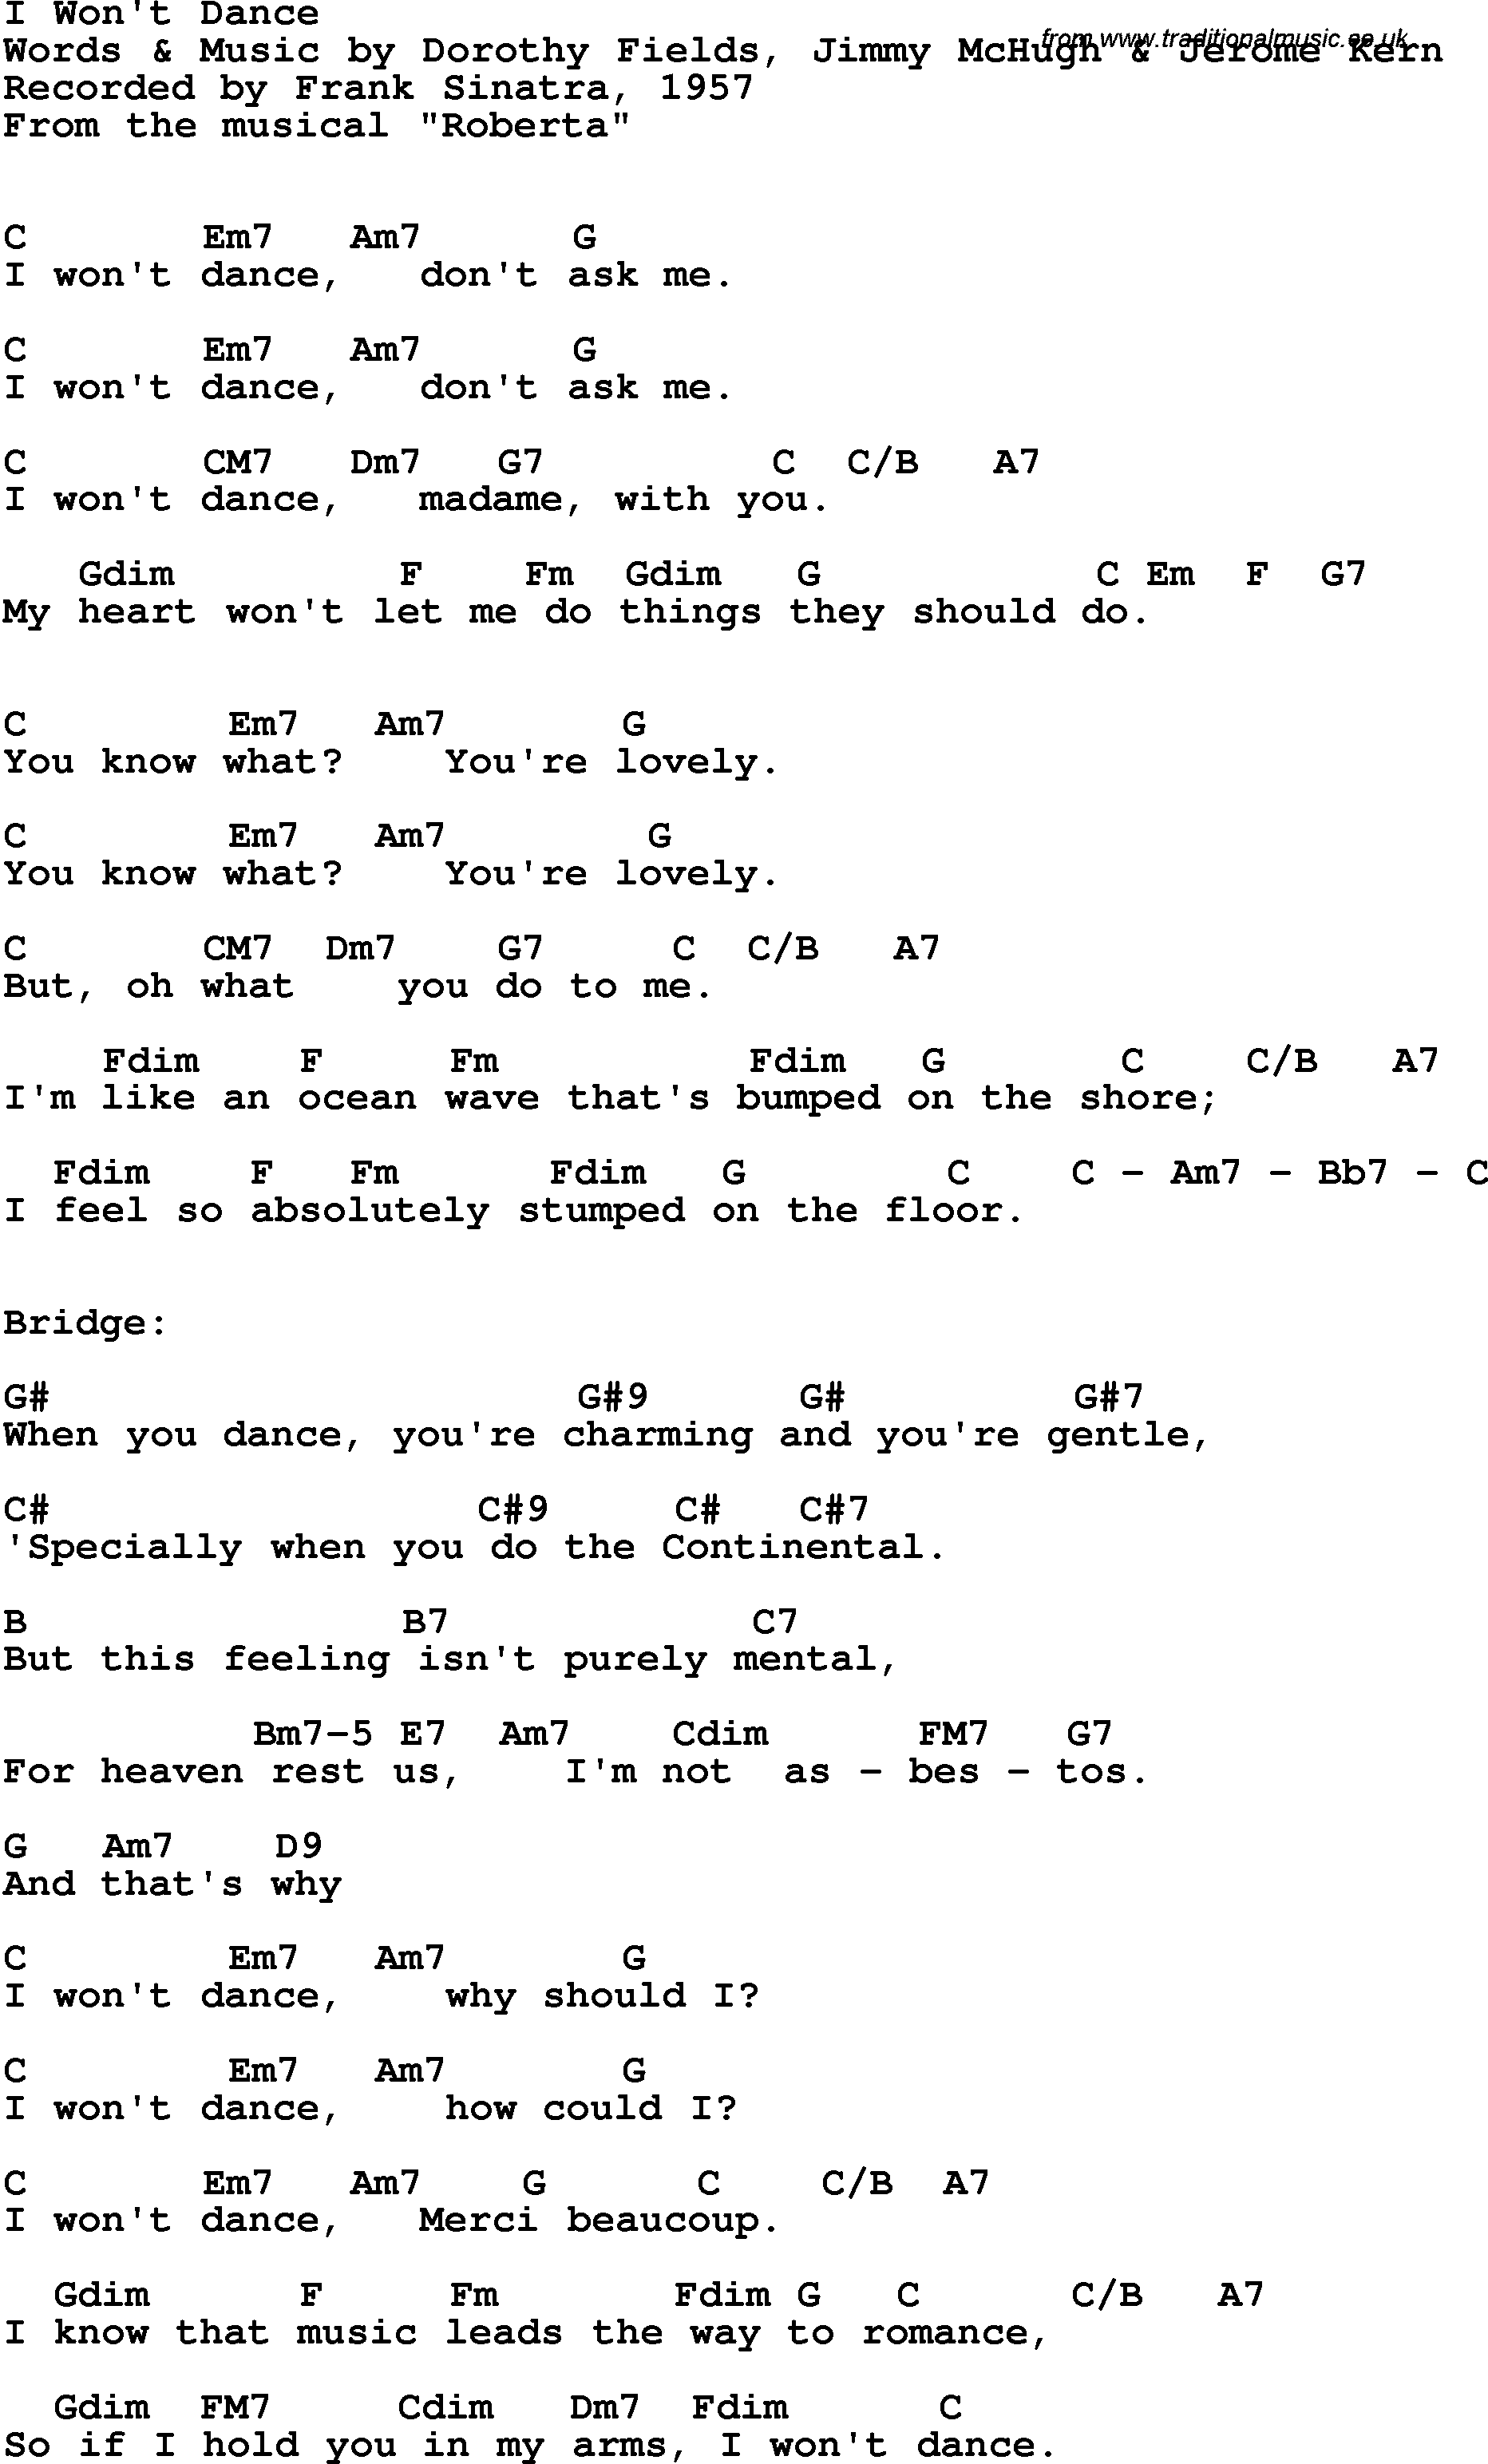 Song Lyrics with guitar chords for I Won't Dance - Frank Sinatra, 1957